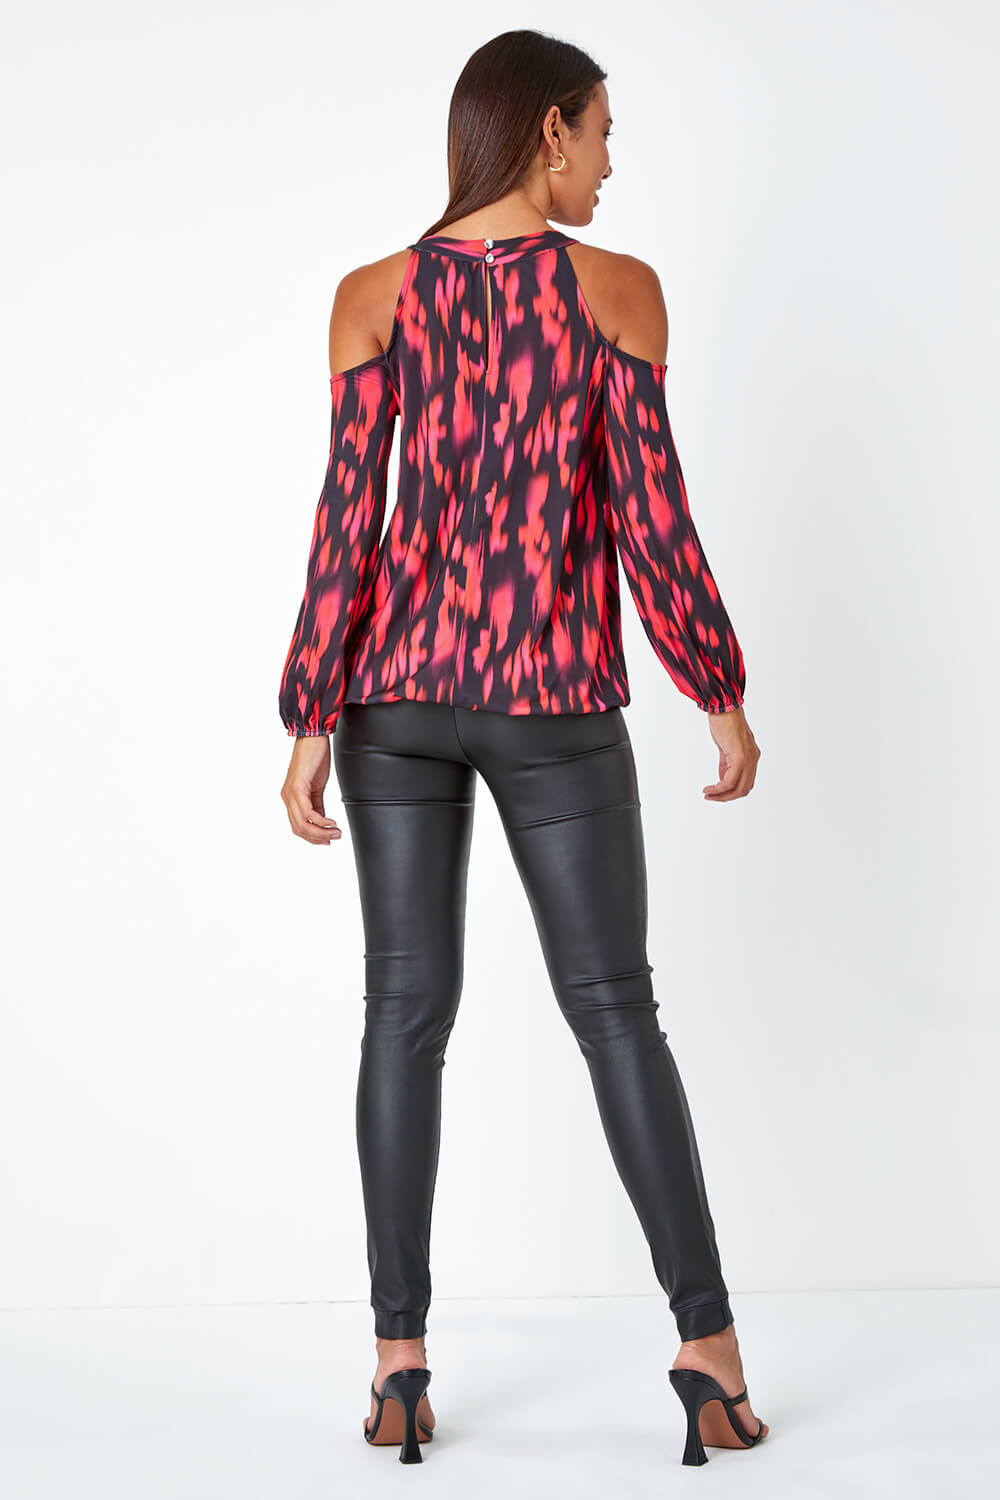 Fuchsia Abstract Print Cold Shoulder Stretch Top, Image 3 of 5